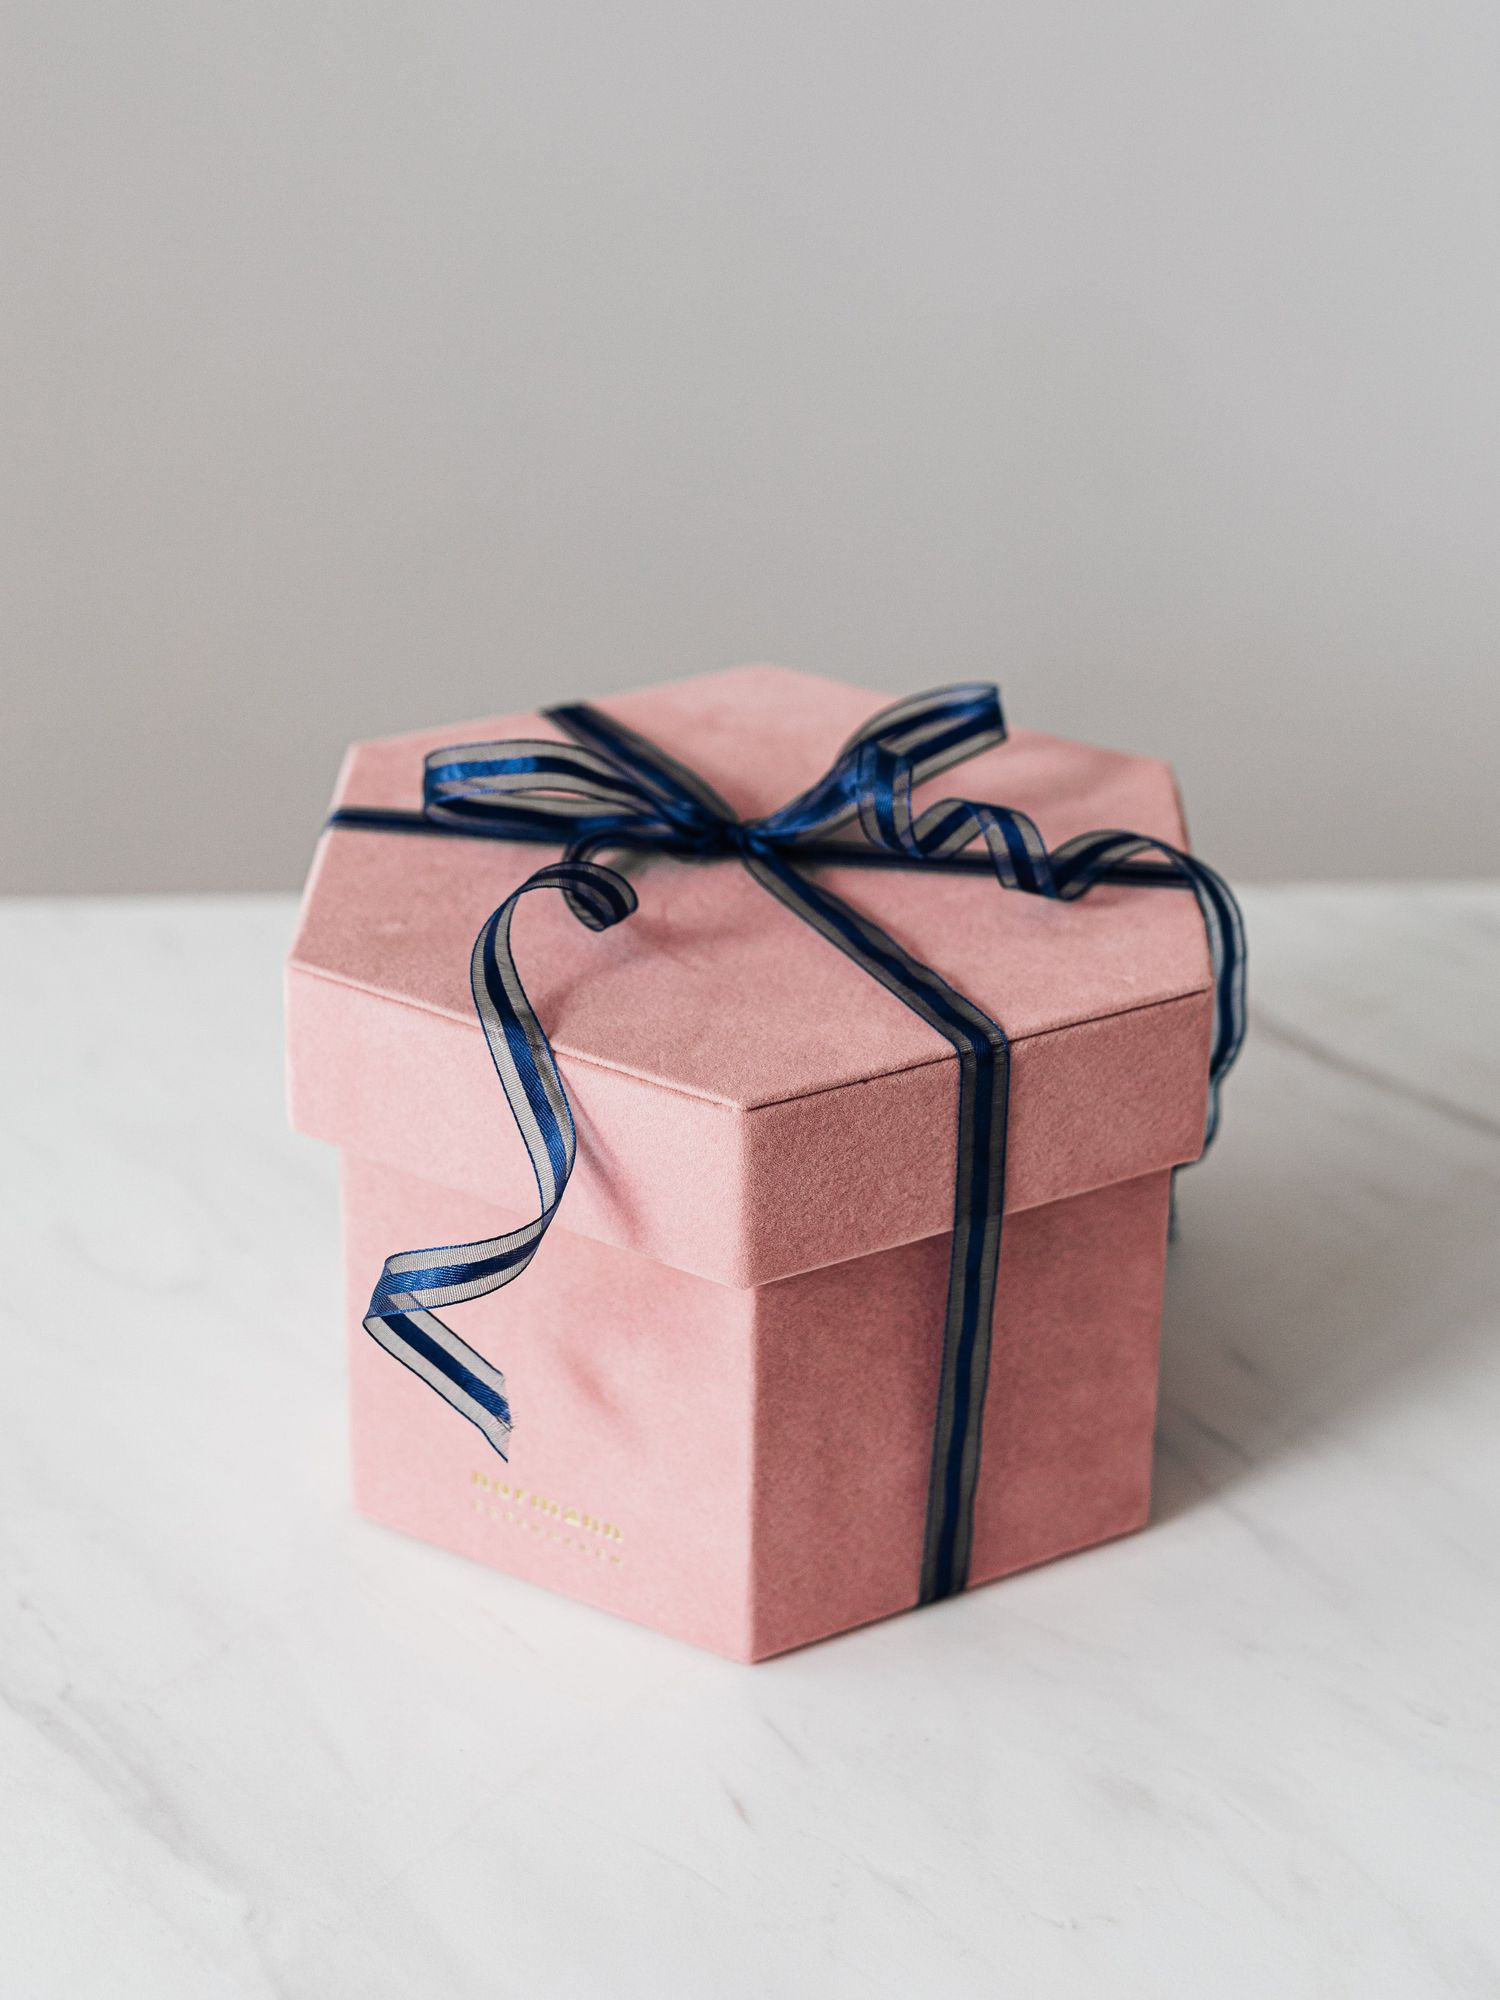 pink gift box with navy blue bow